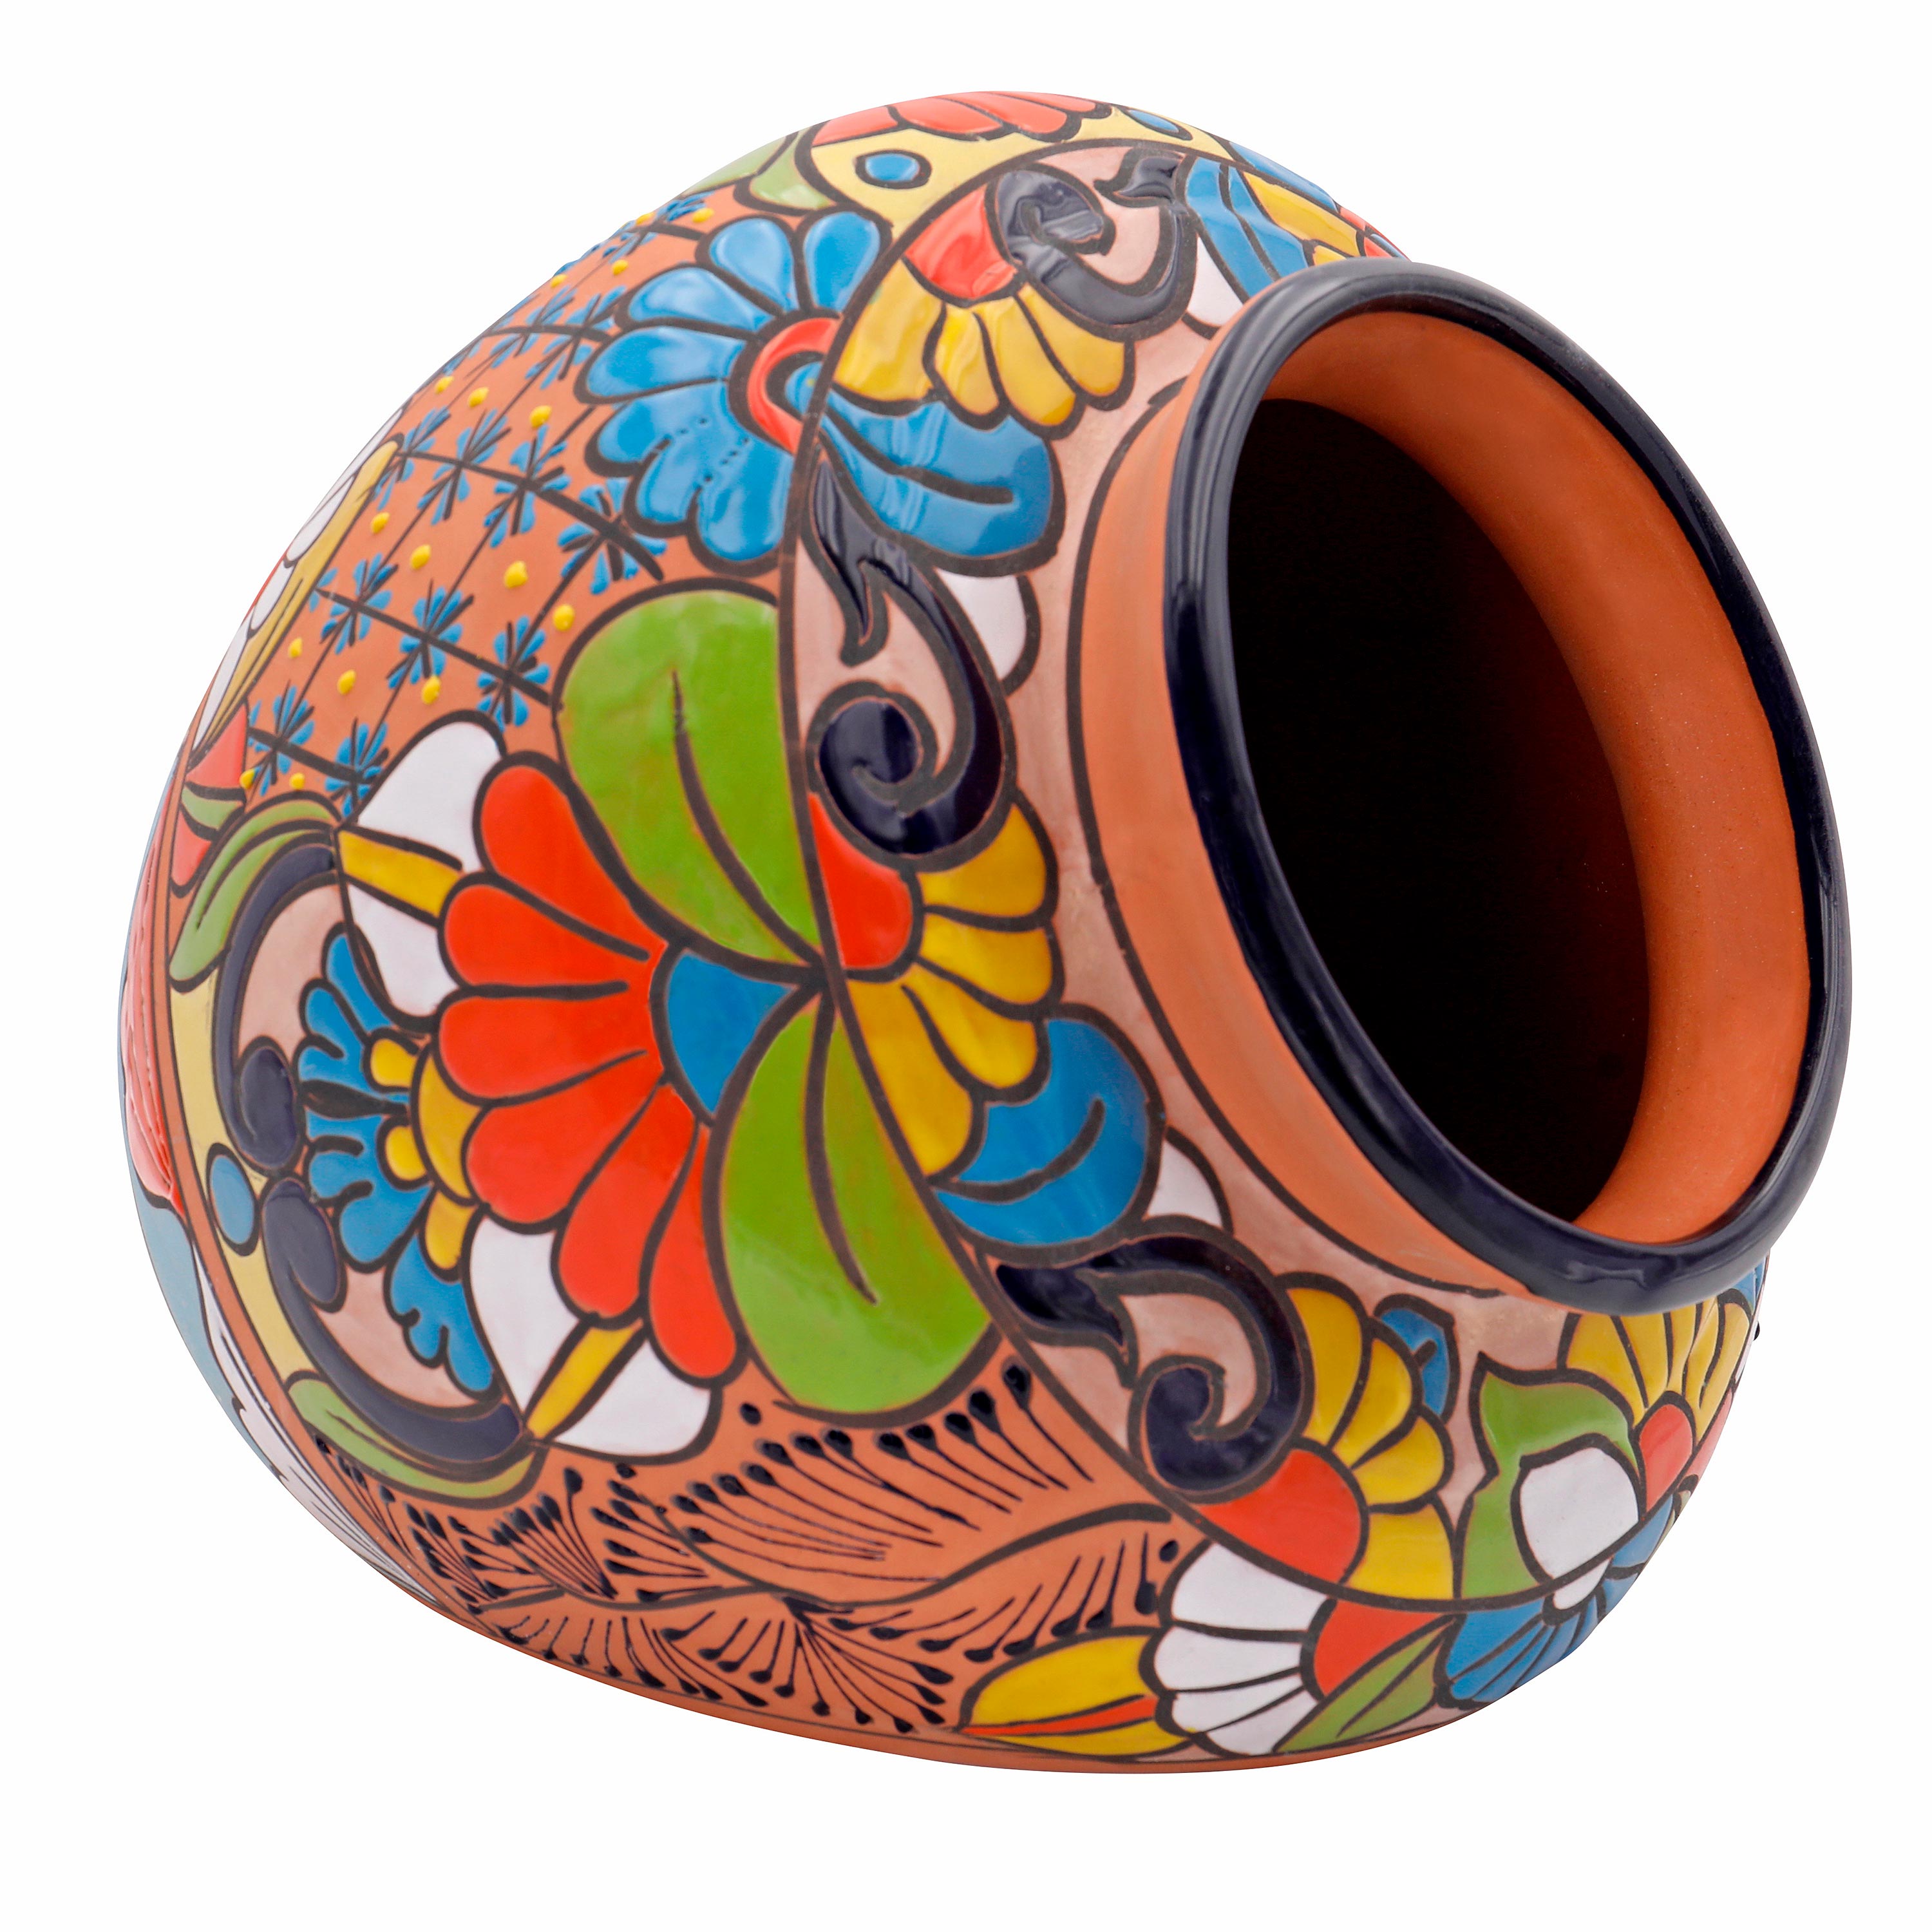 Mexican Flower Pot  Hand Painted Talavera Planter (Extra Large)